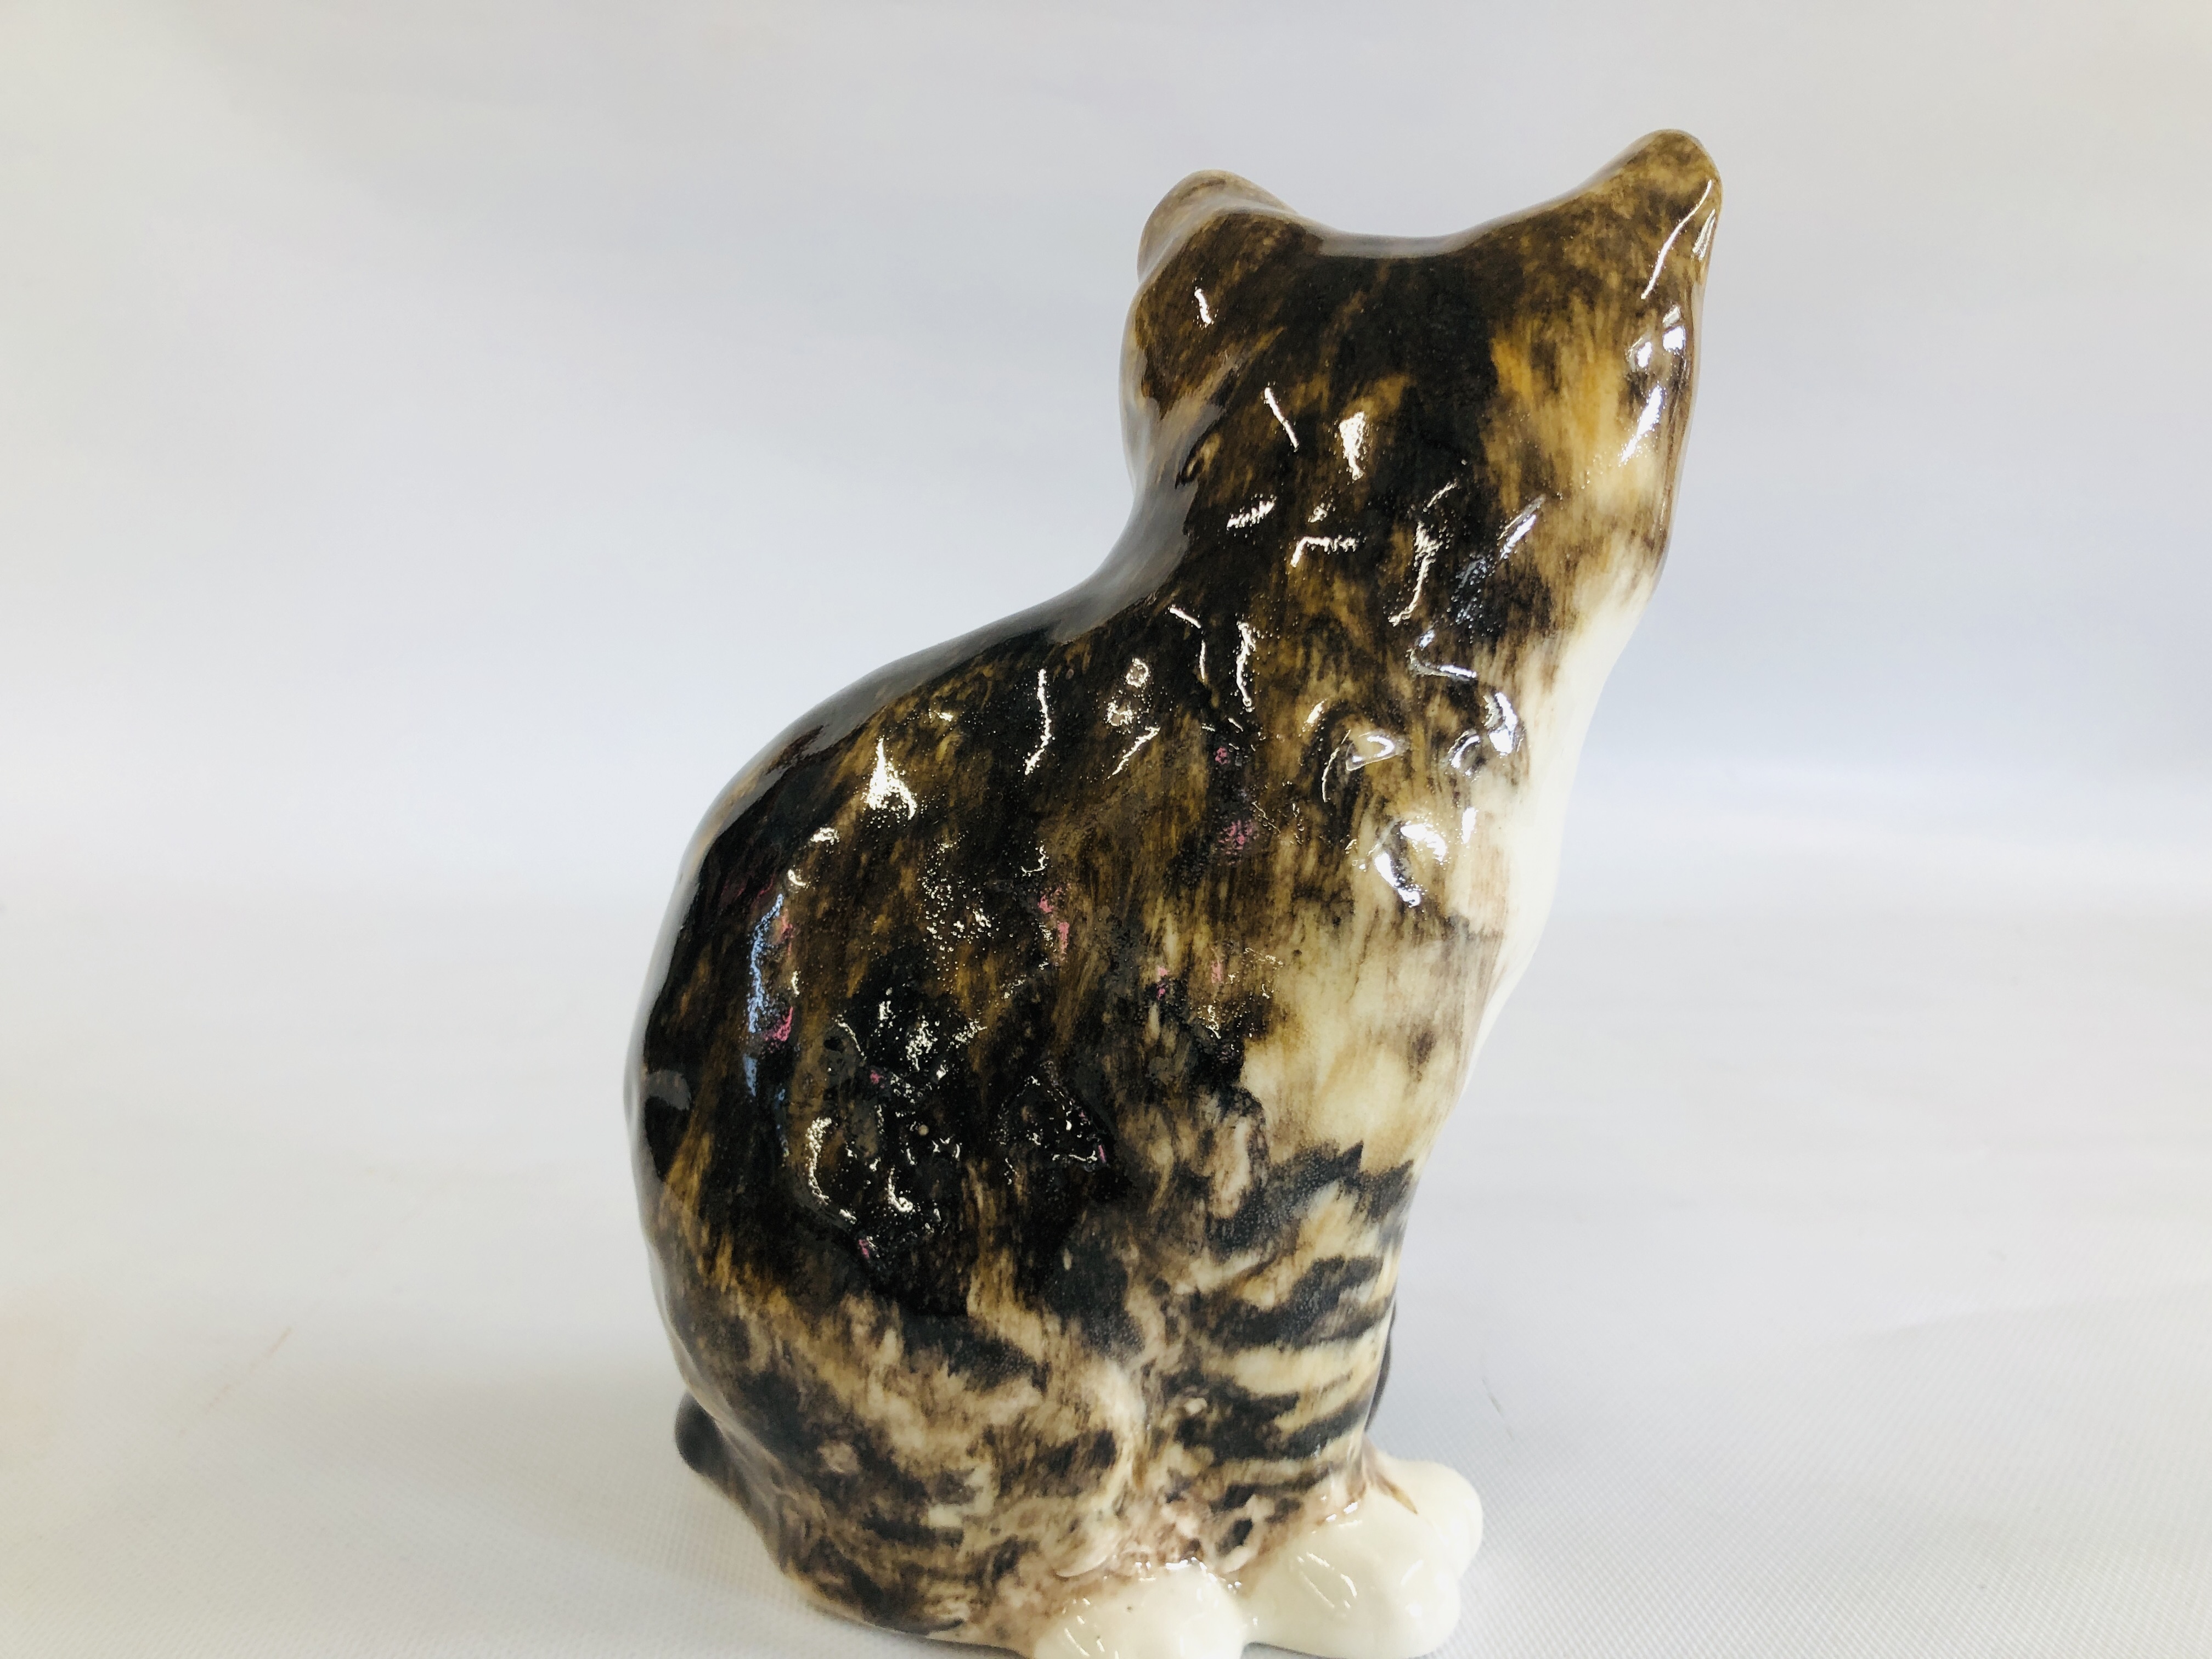 A WINSTANLEY POTTERY EXAMPLE OF A "SEATED" CAT BEARING SIGNATURE TO THE BASE, H 23. - Image 15 of 16